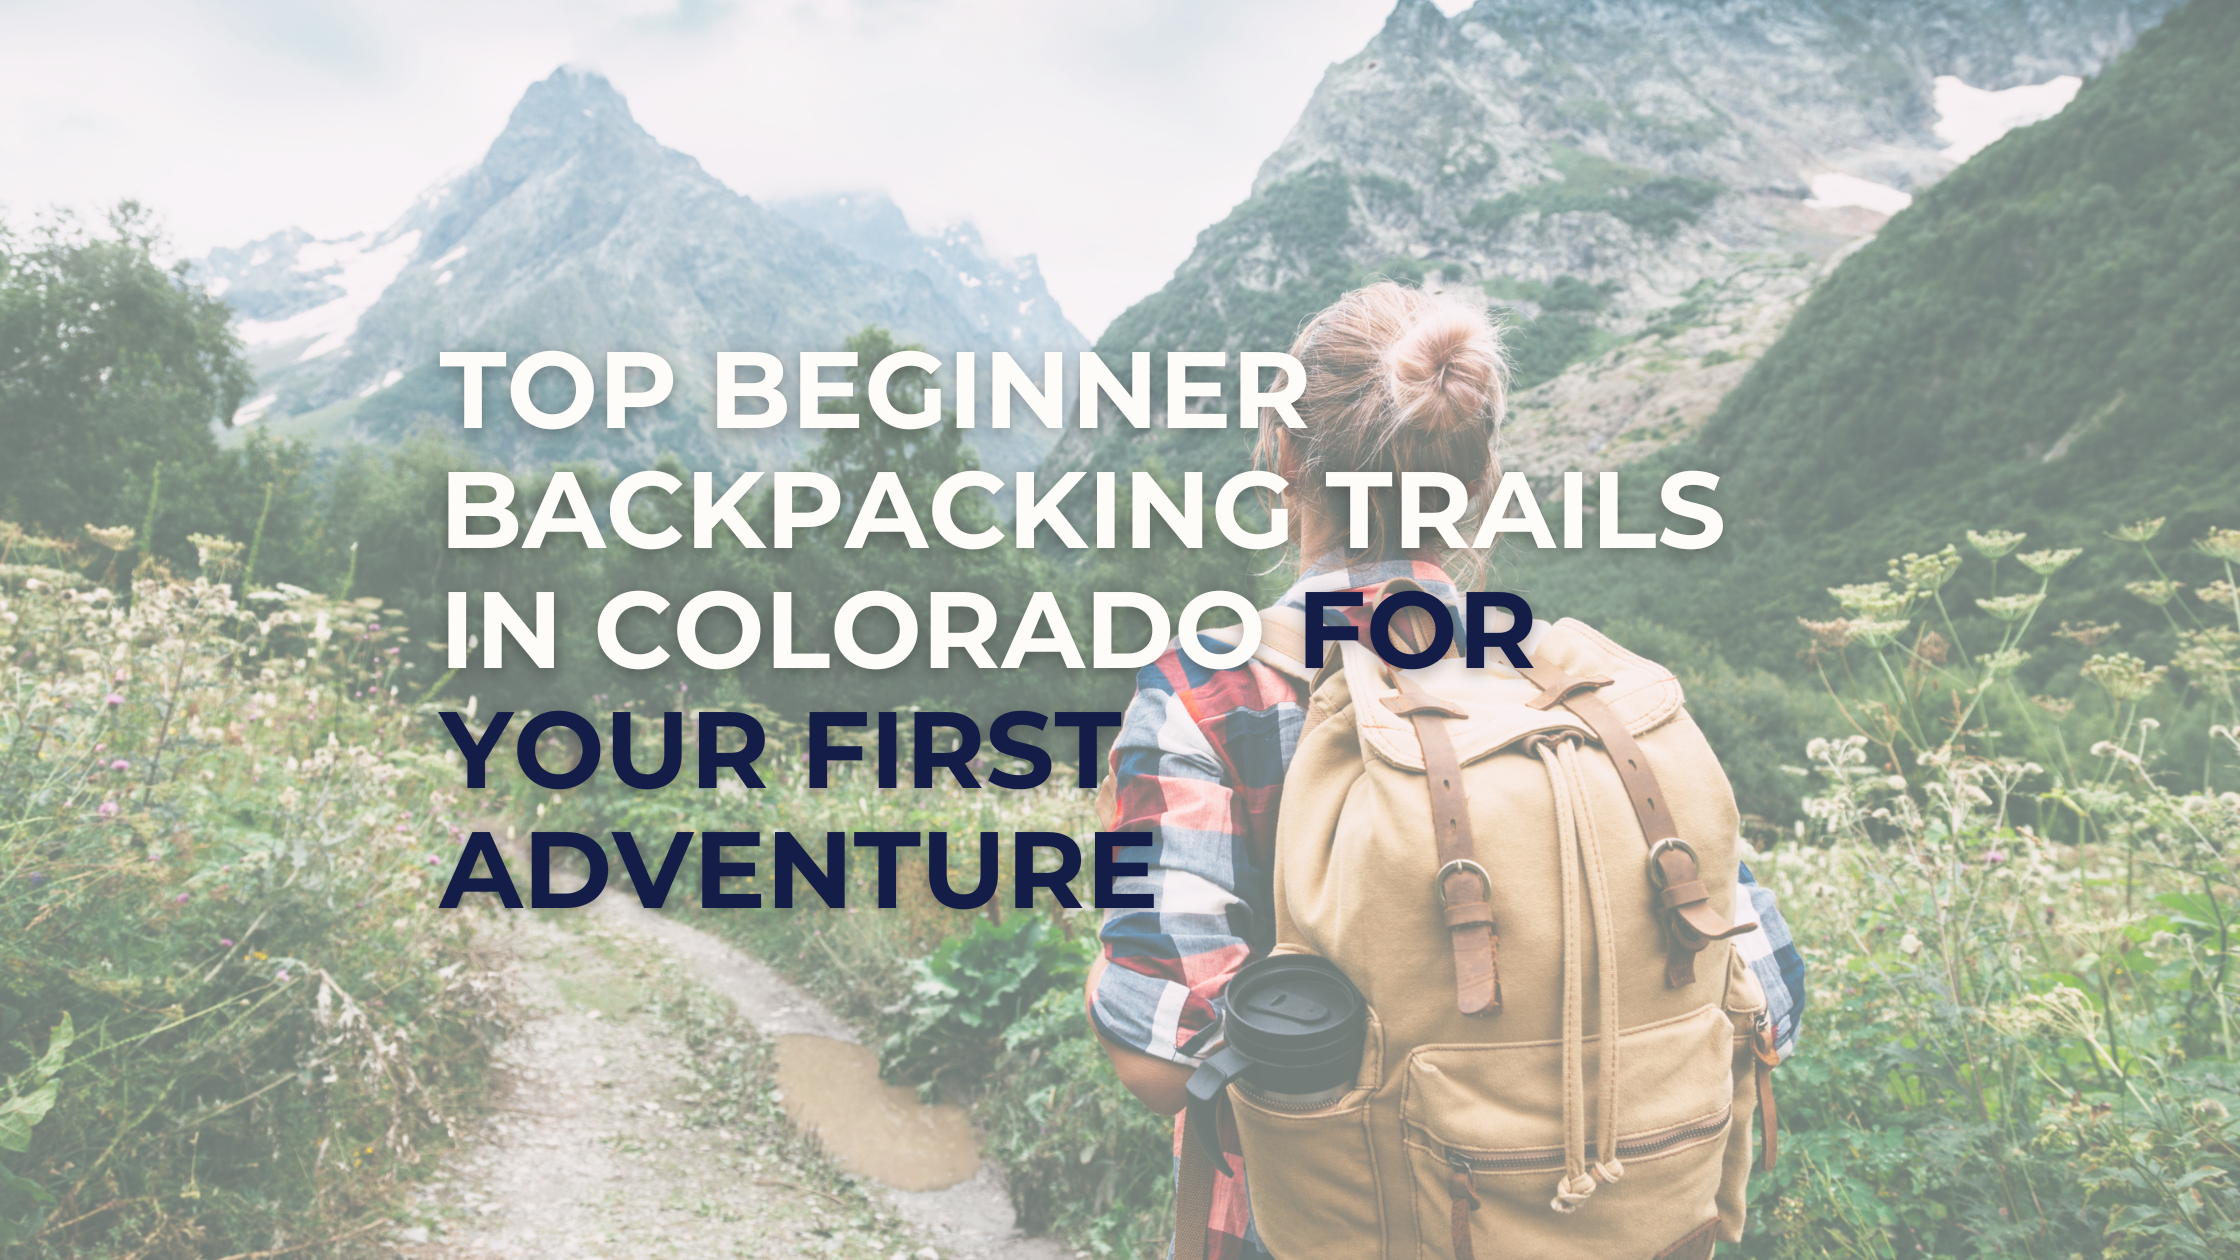 Top Beginner Backpacking Trails in Colorado for Your First Adventure